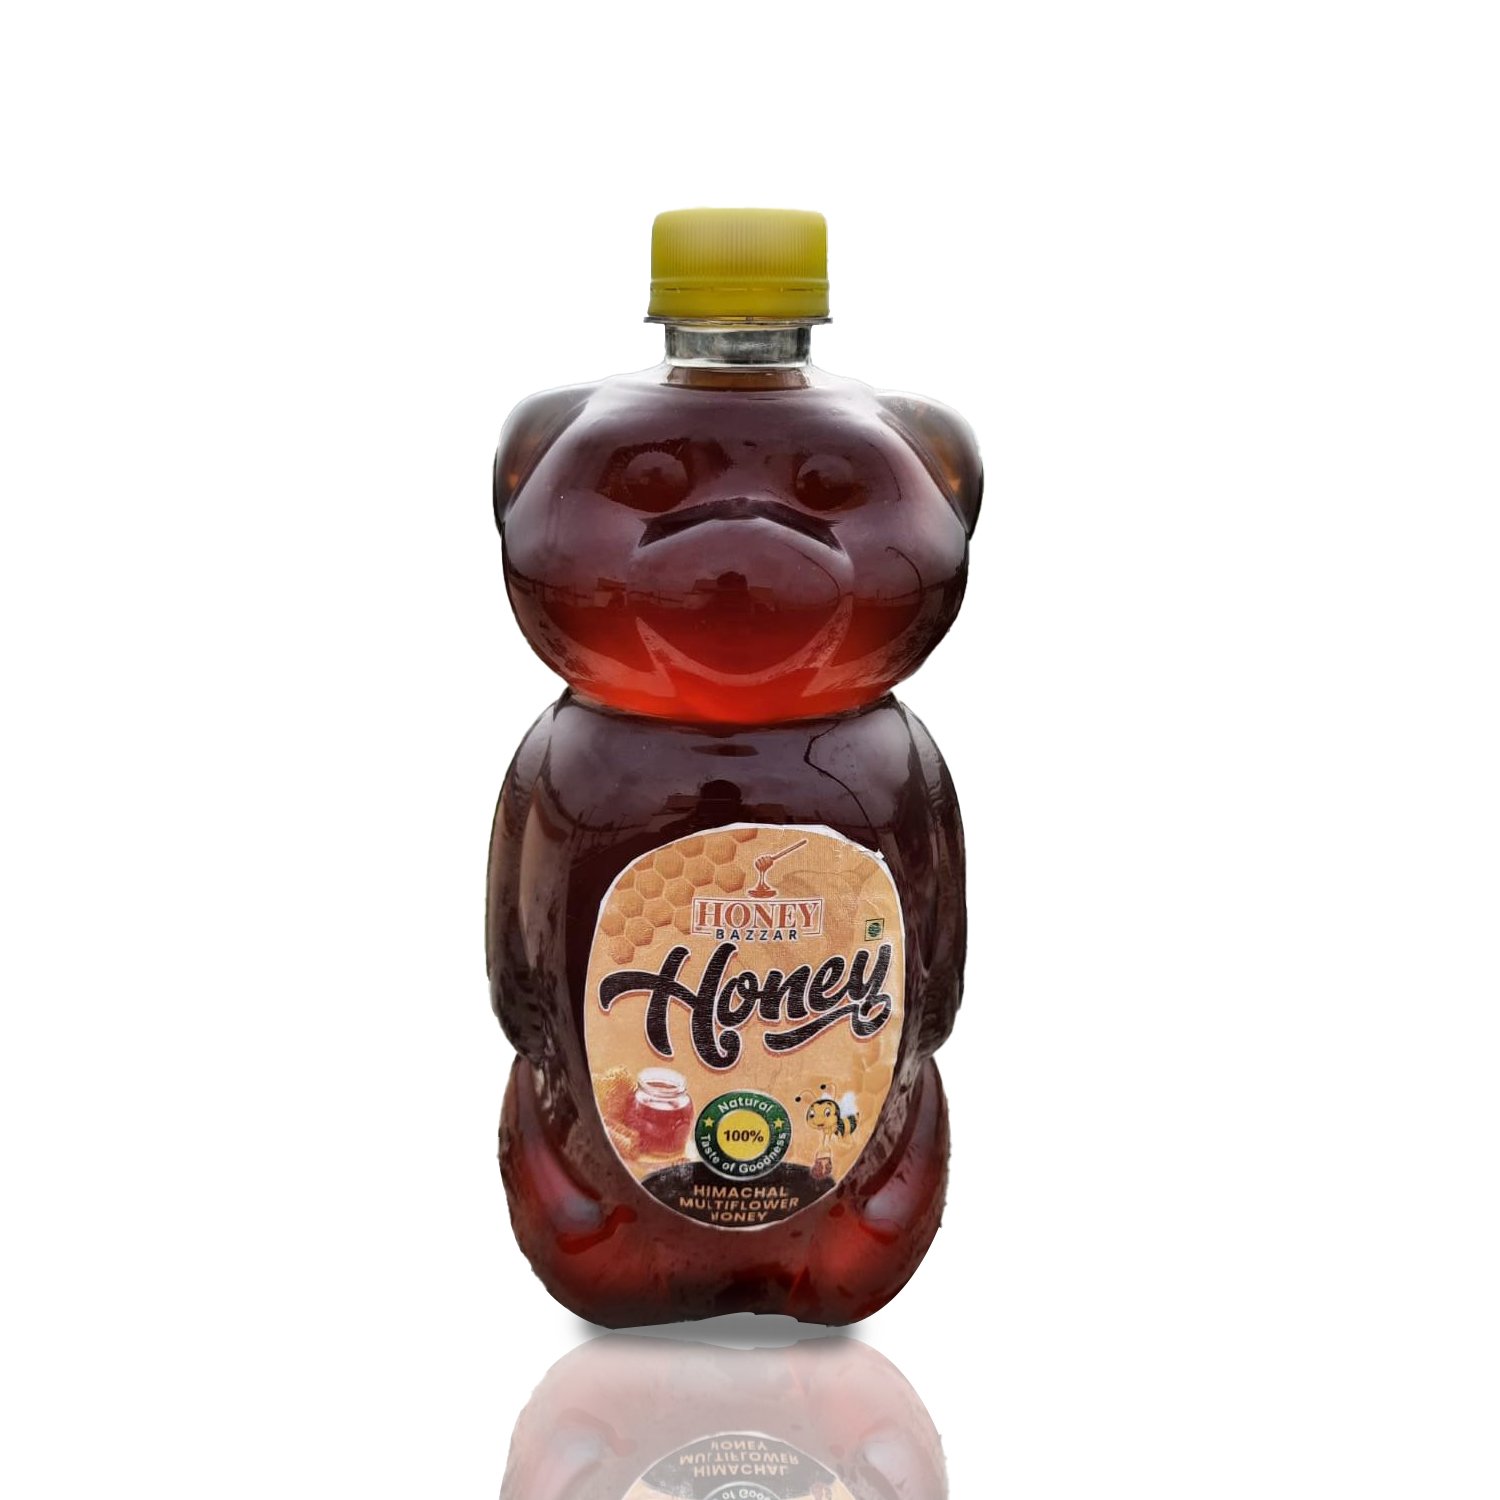 Himachal Honey: A Concoction of the Therapeutic Elements of Himachal’s Herbs